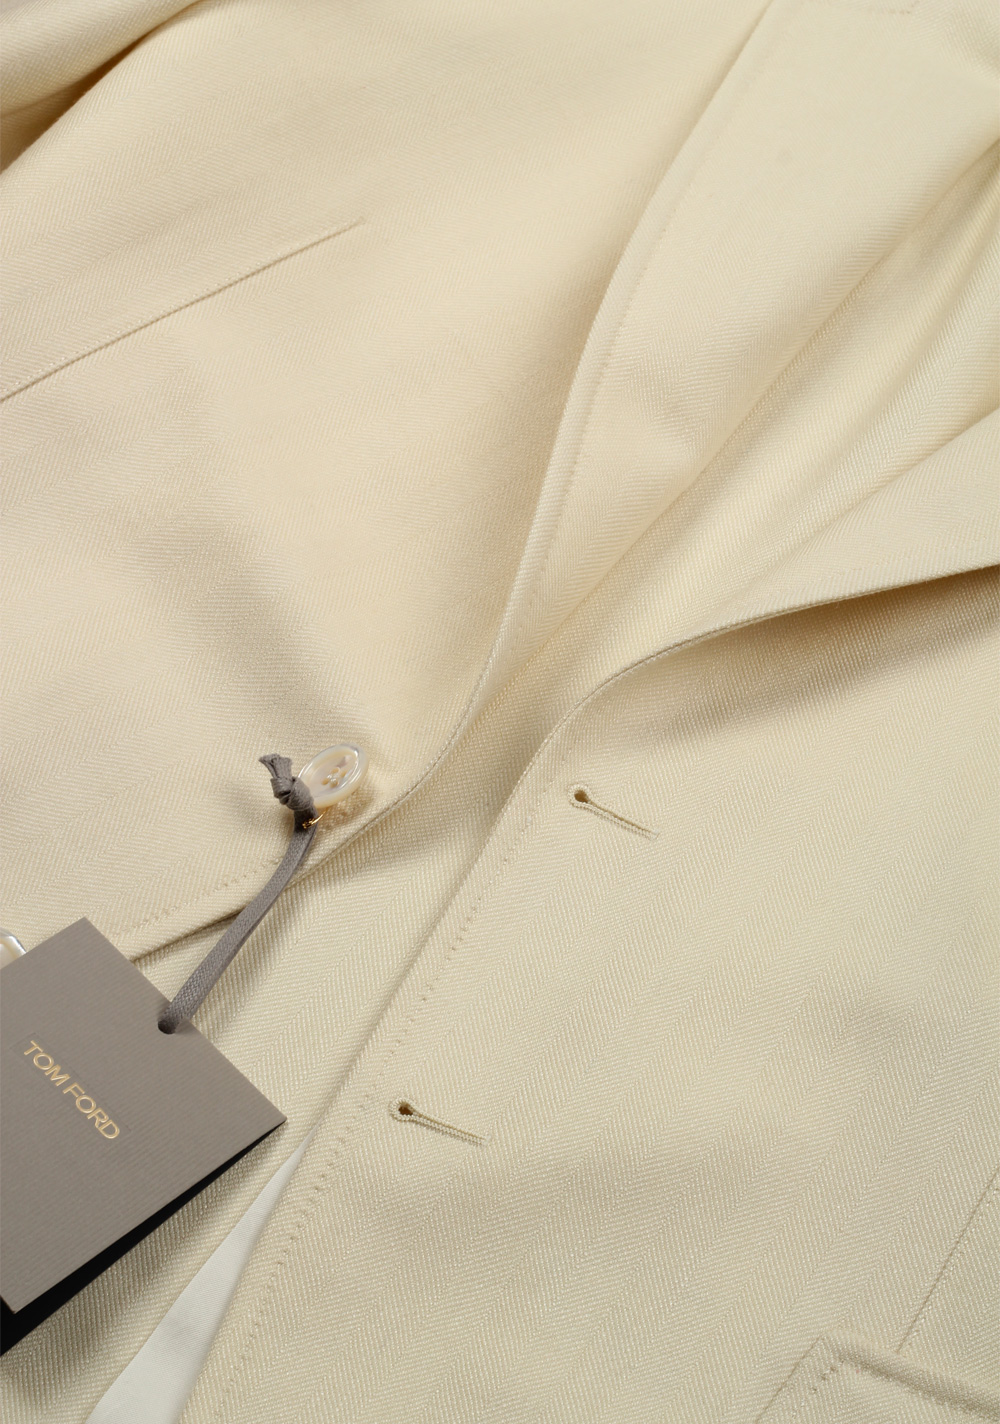 TOM FORD O’Connor Beige Sport Coat Size 50 / 40R U.S. Mohair Silk Wool Fit Y | Costume Limité